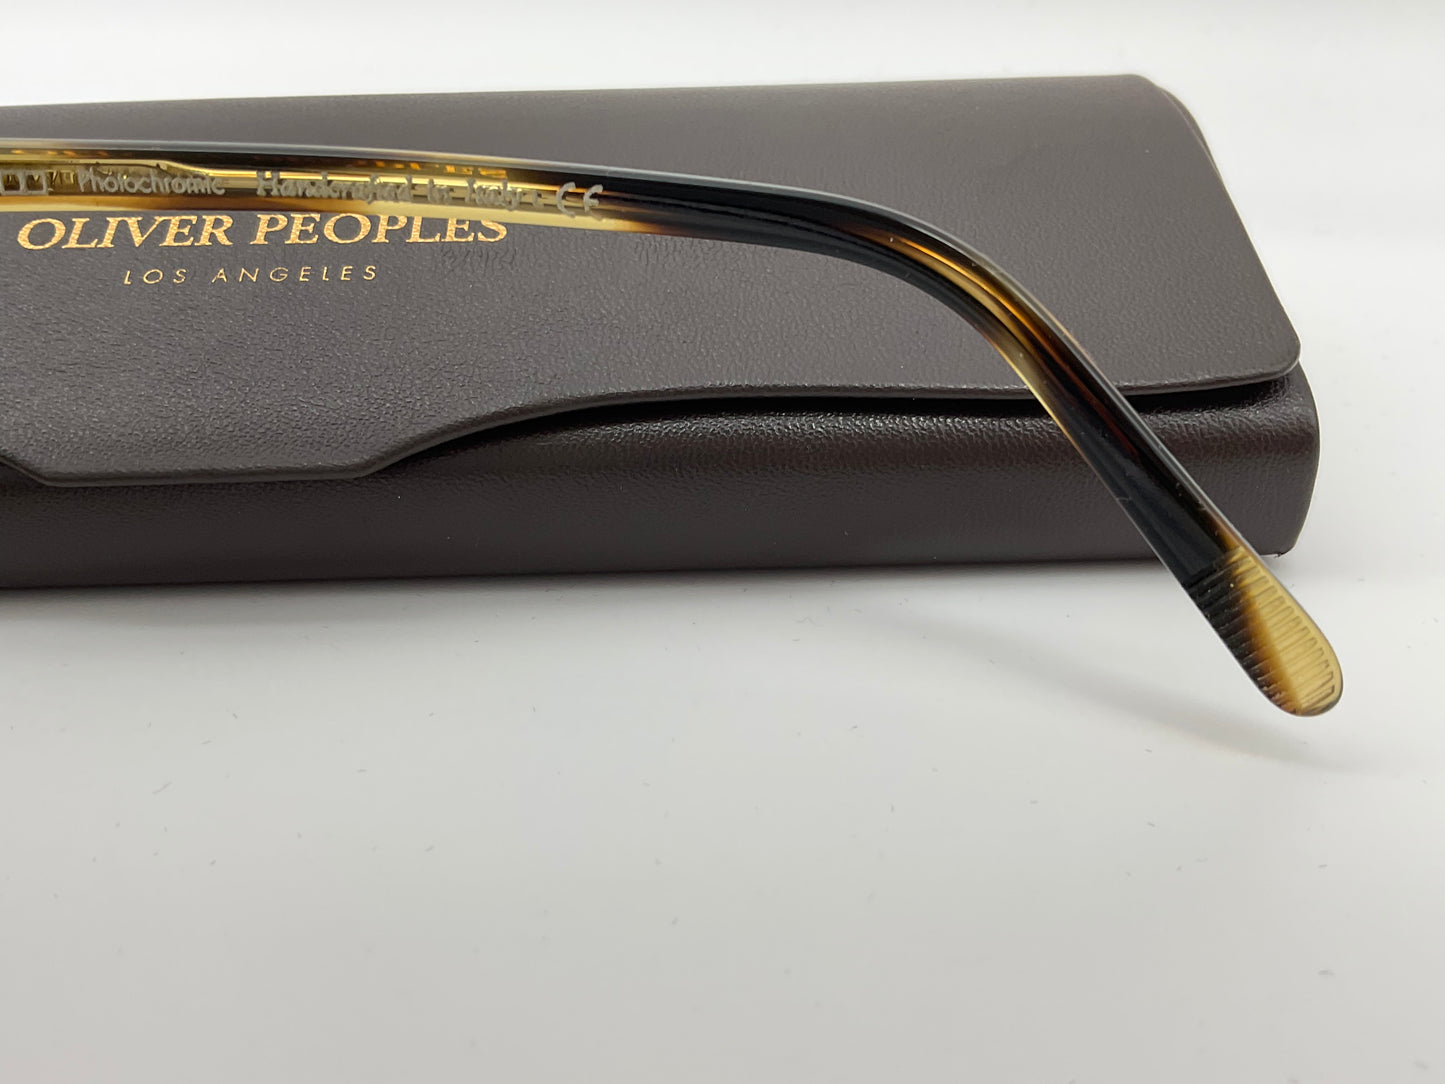 Oliver Peoples Fairmont 49mm OV5219S sunglasses 1003R9 Coco/Champagne photochromic NEW